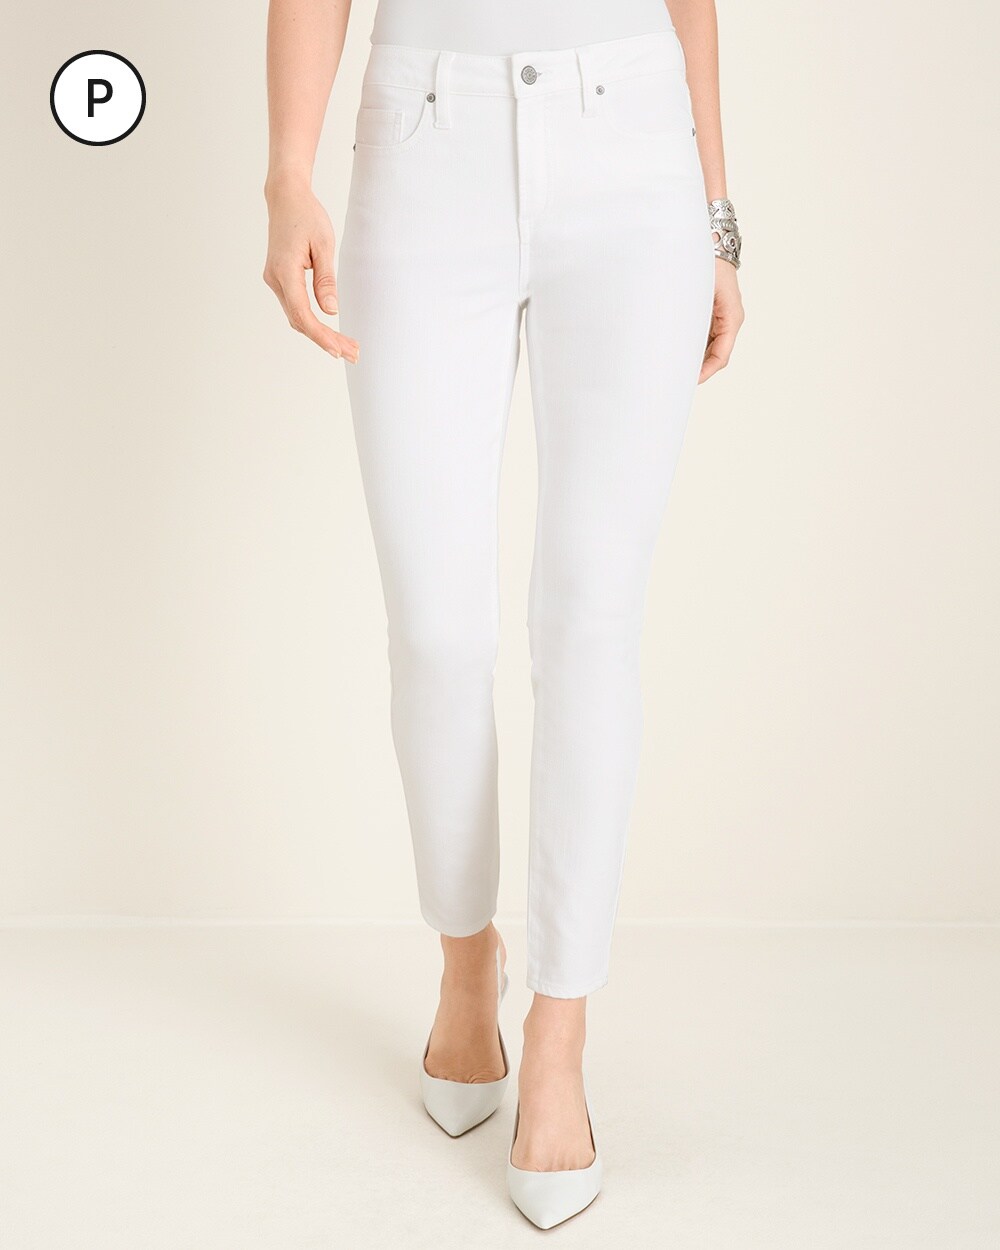 Petite No-Stain White High-Rise Skinny Ankle Jeans